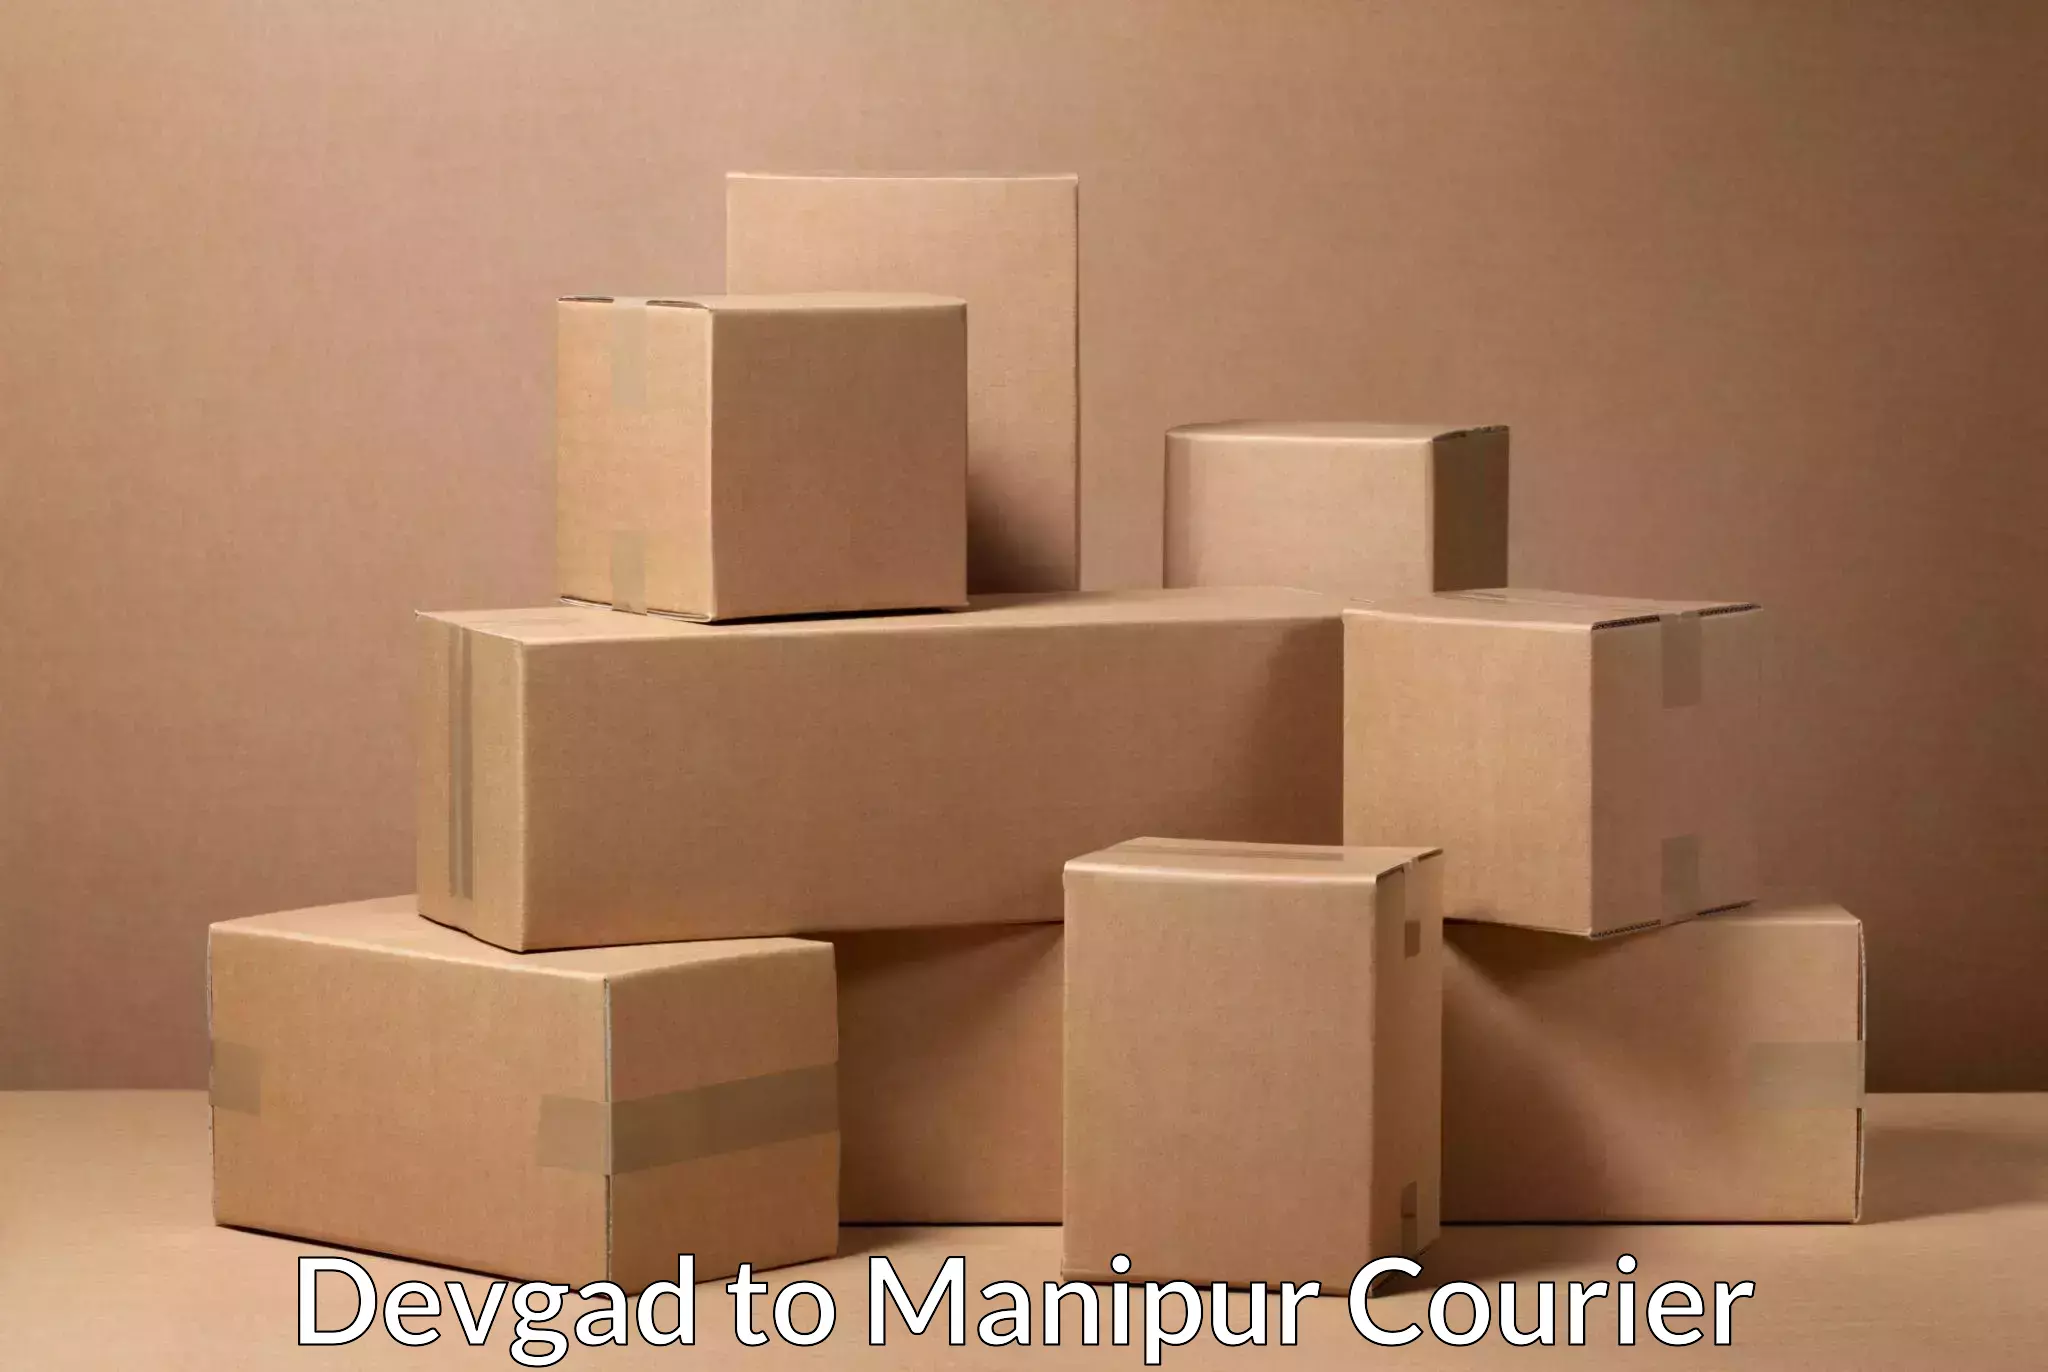 Customer-oriented courier services Devgad to Manipur